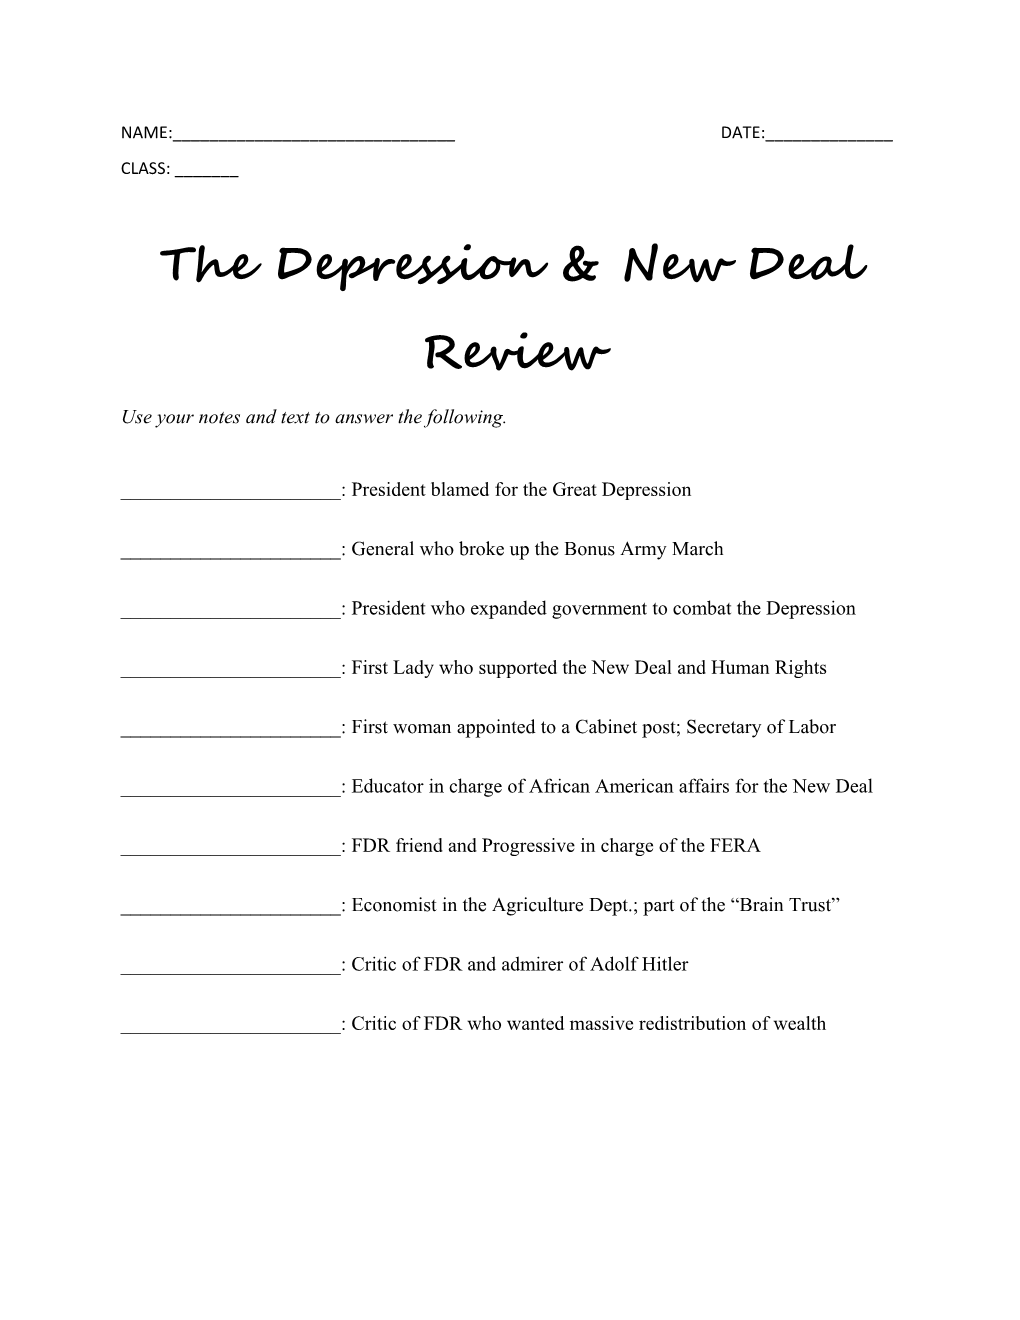 The Depression & New Deal